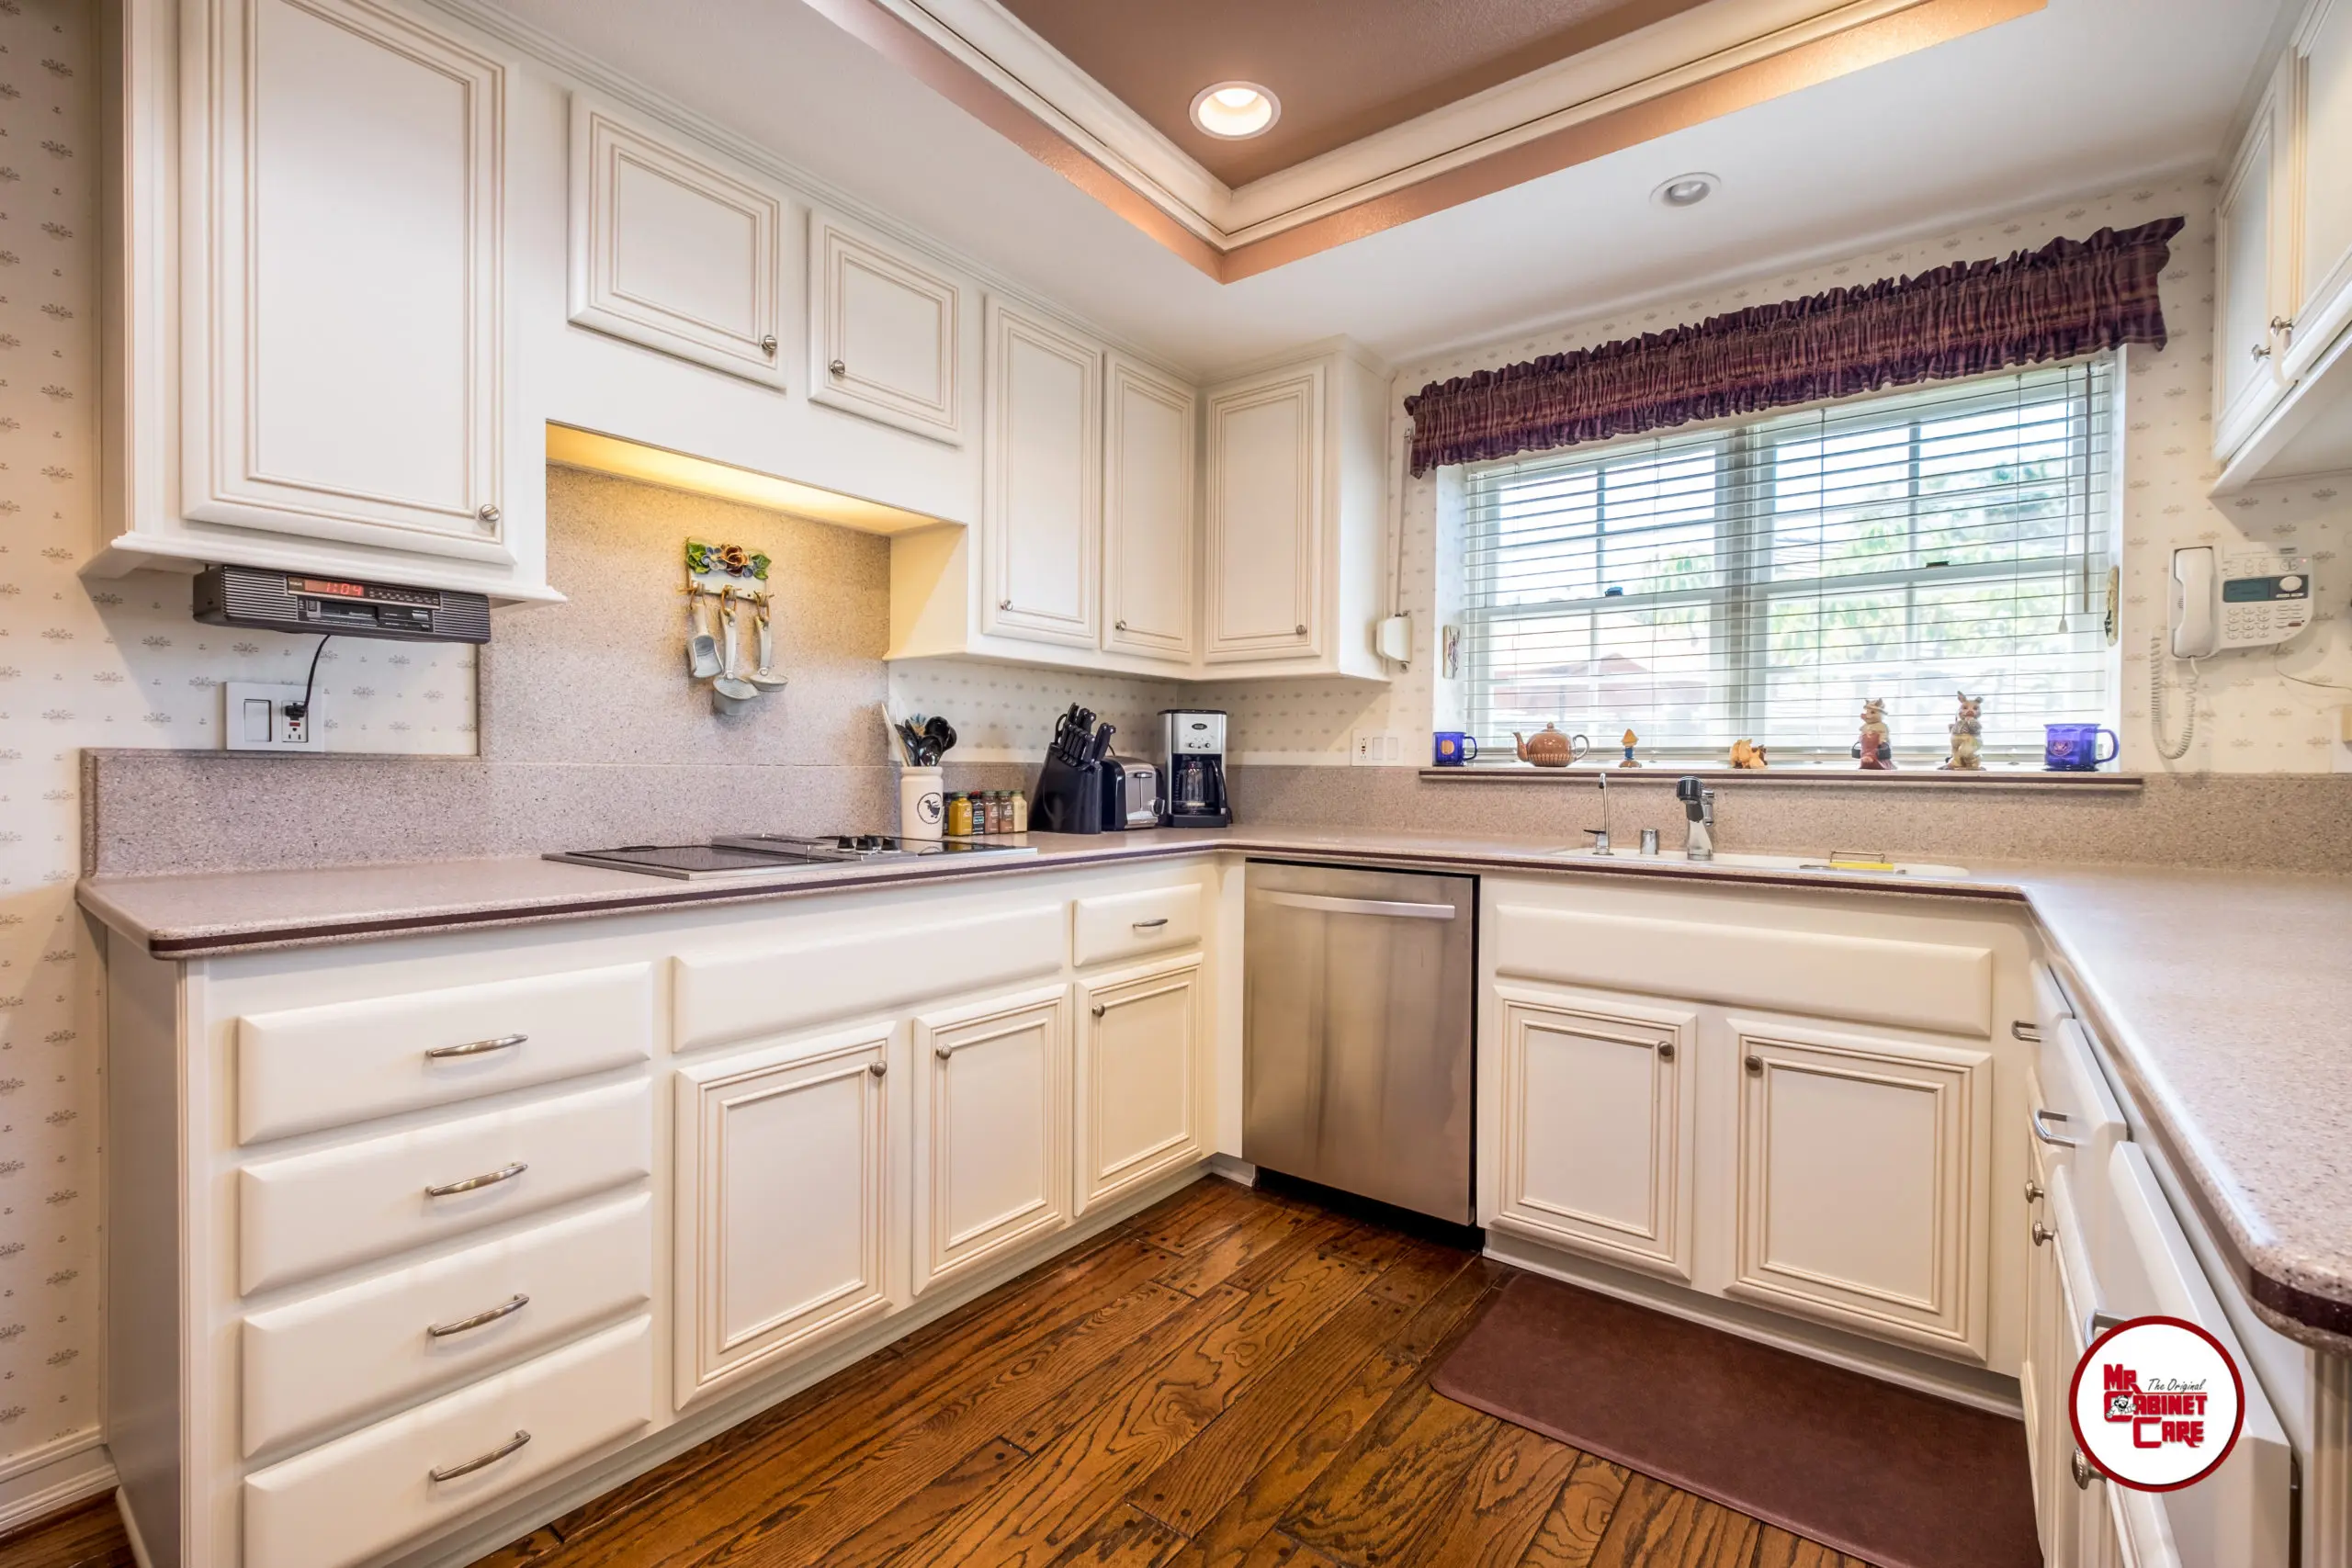 Breaking Down The Costs Of Cabinet Refacing, How Much Do Solid Wood Cabinets Cost